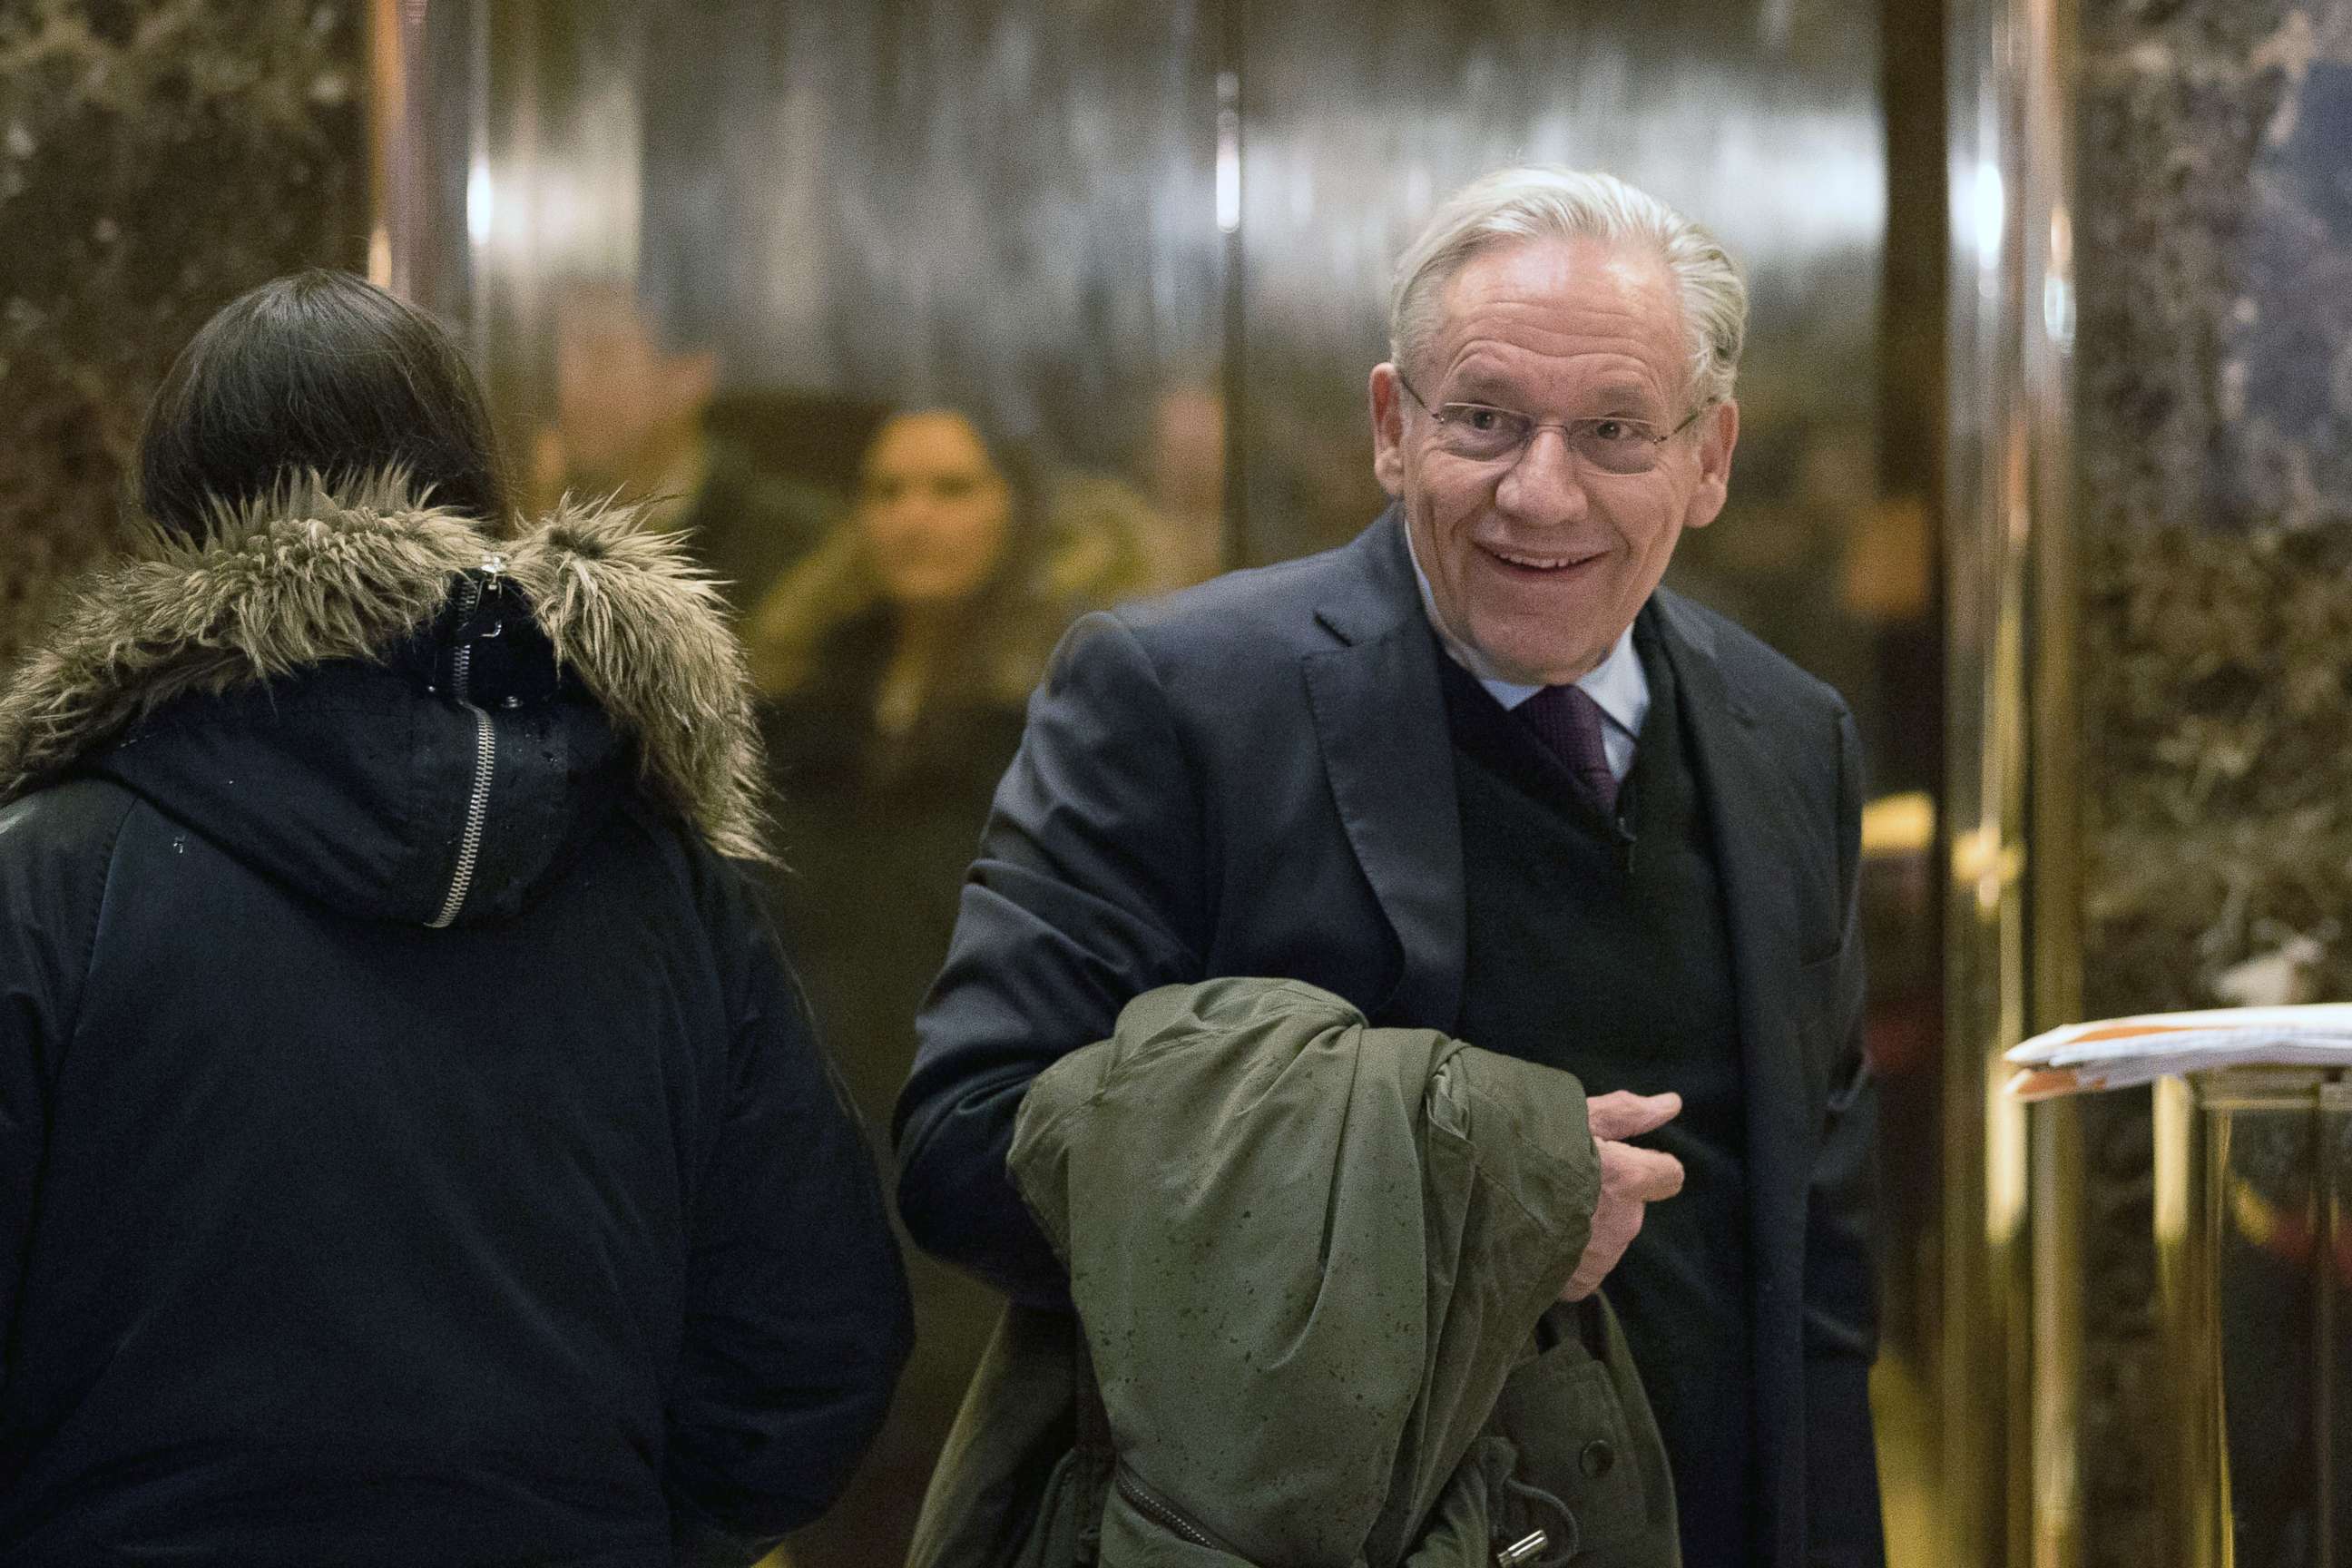 PHOTO: In this file photo, journalist Bob Woodward arrives at Trump Tower, Jan. 3, 2017, in New York City.